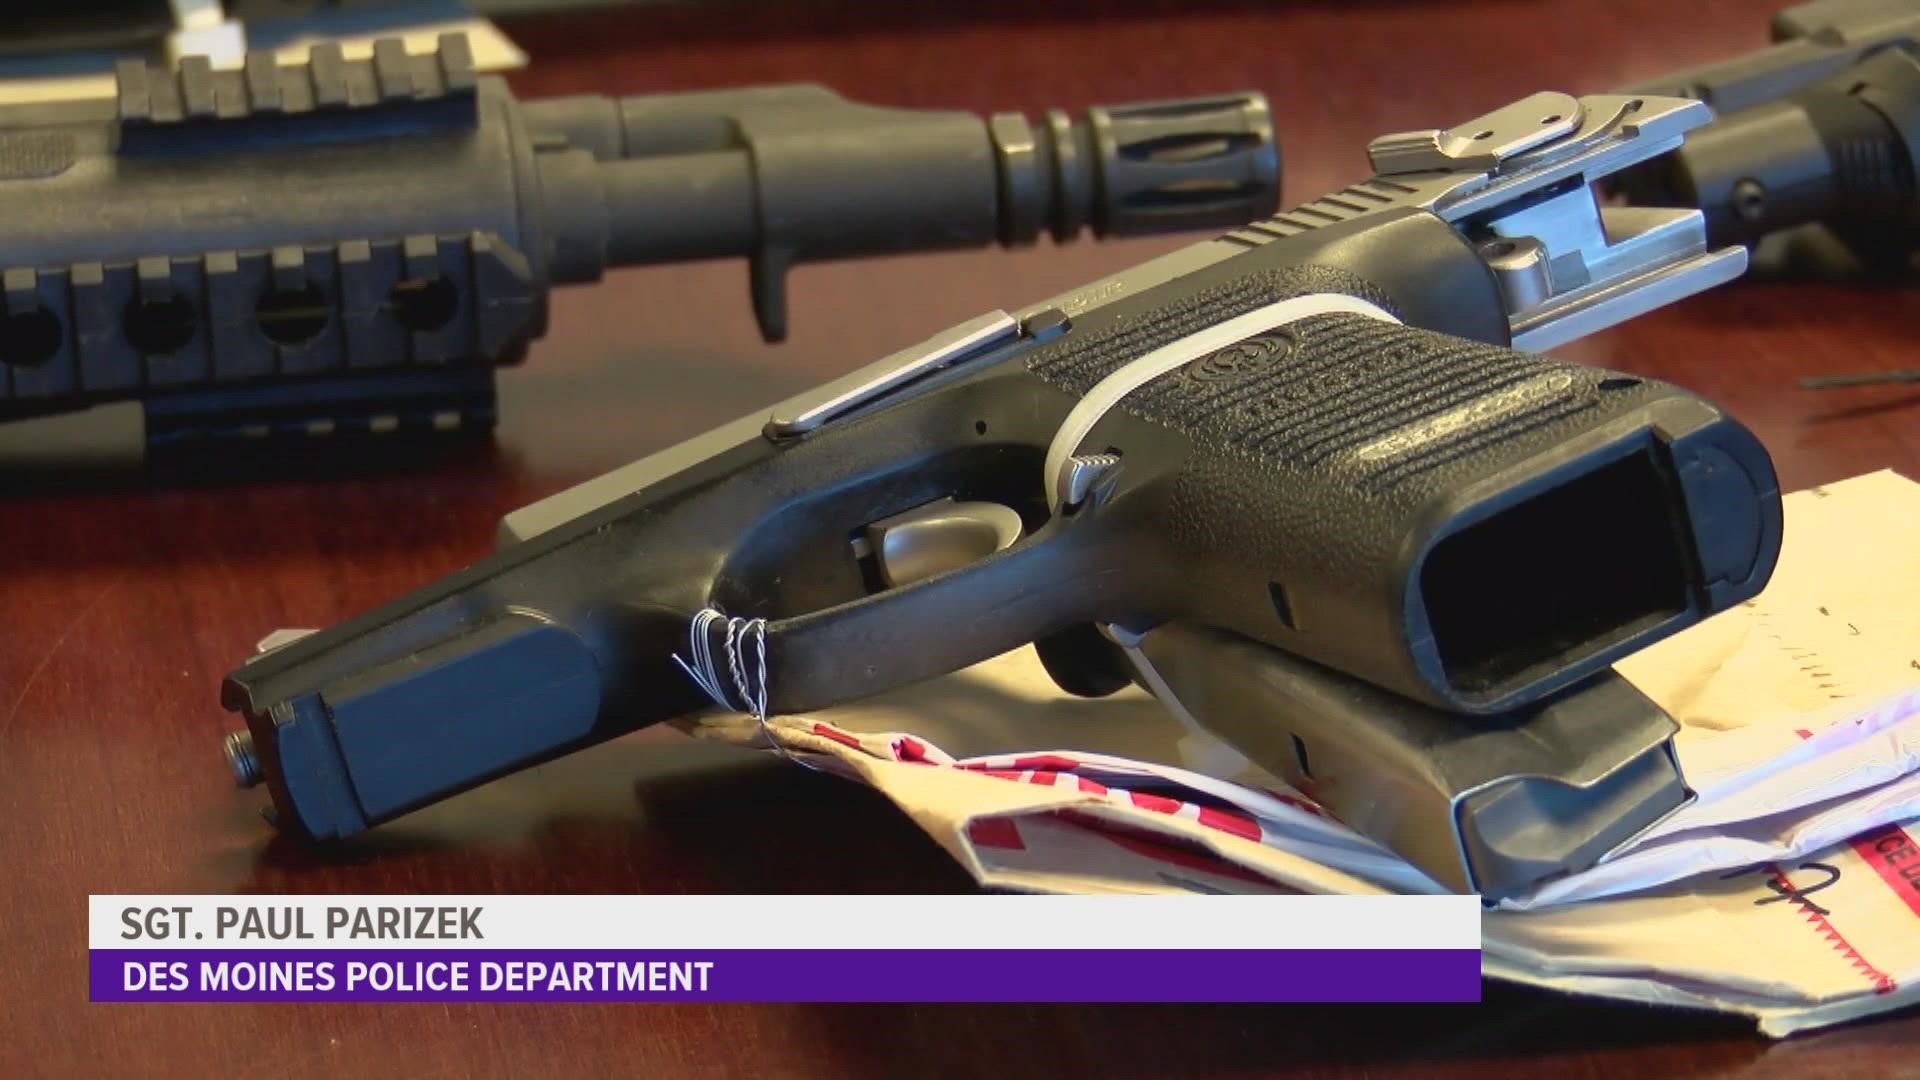 In 2022, DMPD has taken 32 guns from kids who are 17-years-old or younger.